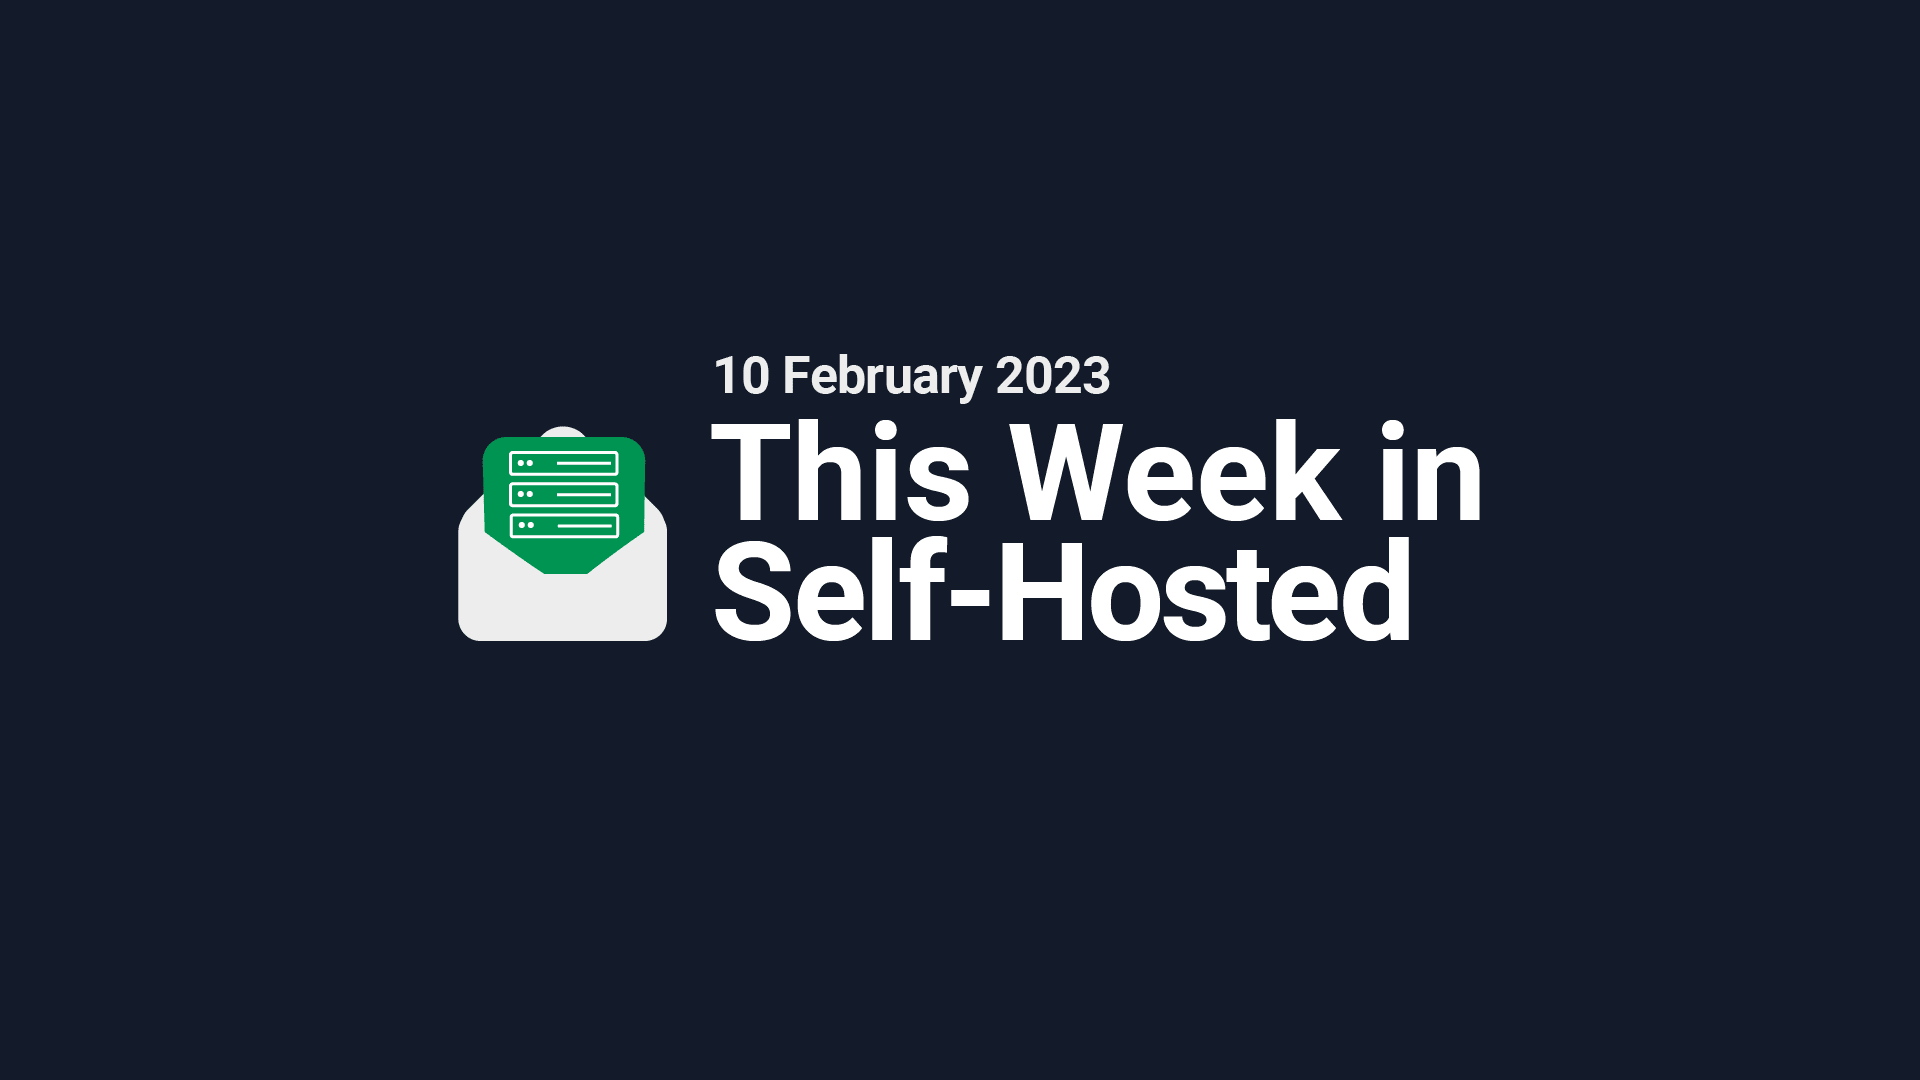 This Week in Self-Hosted (10 February 2023) Post image